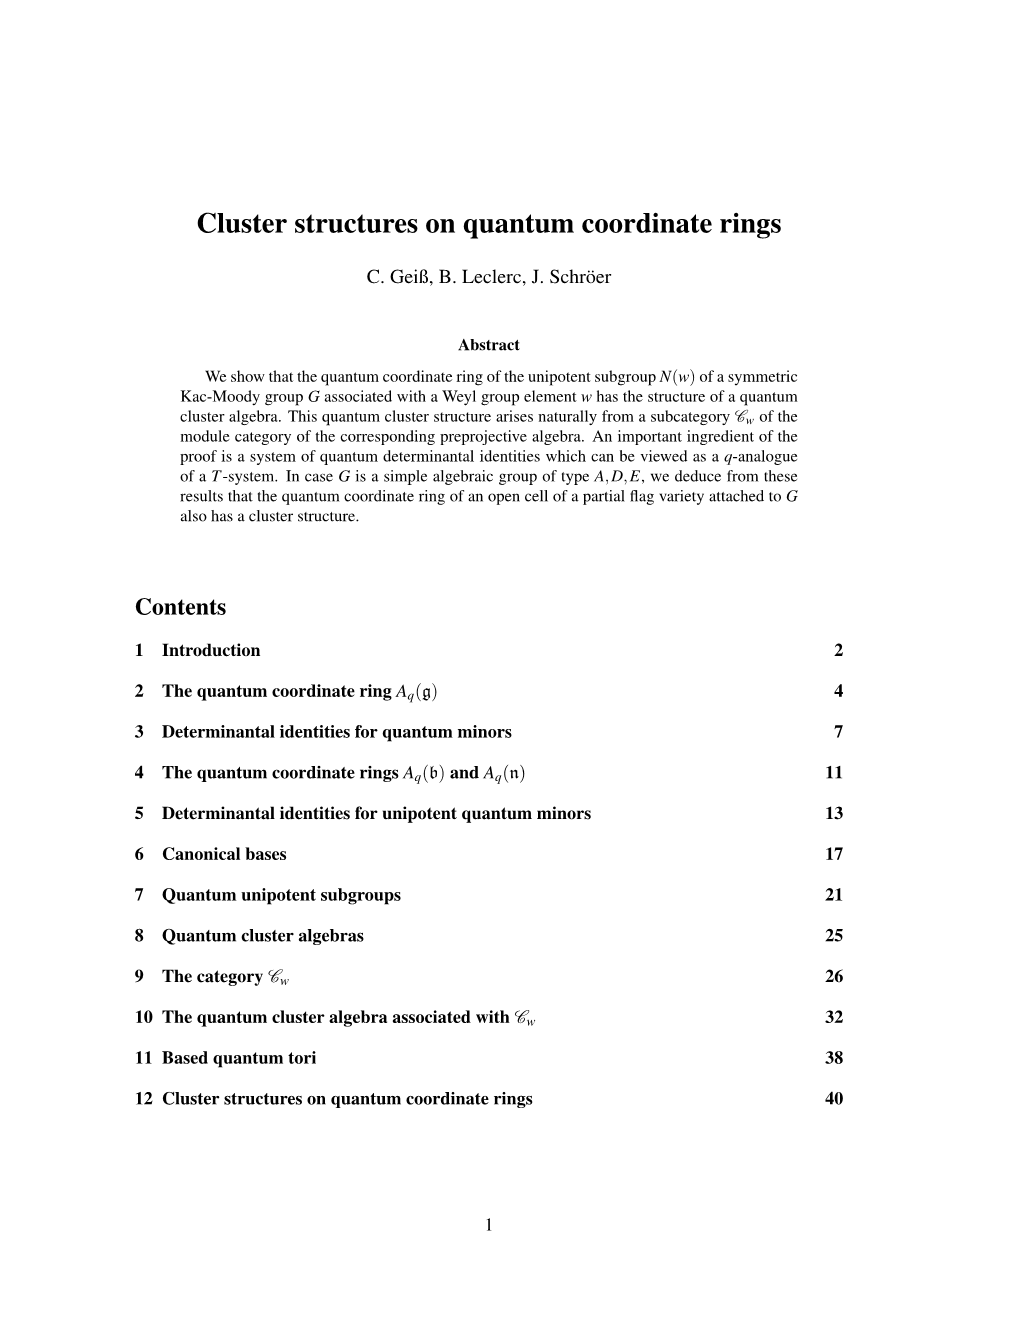 Cluster Structures on Quantum Coordinate Rings